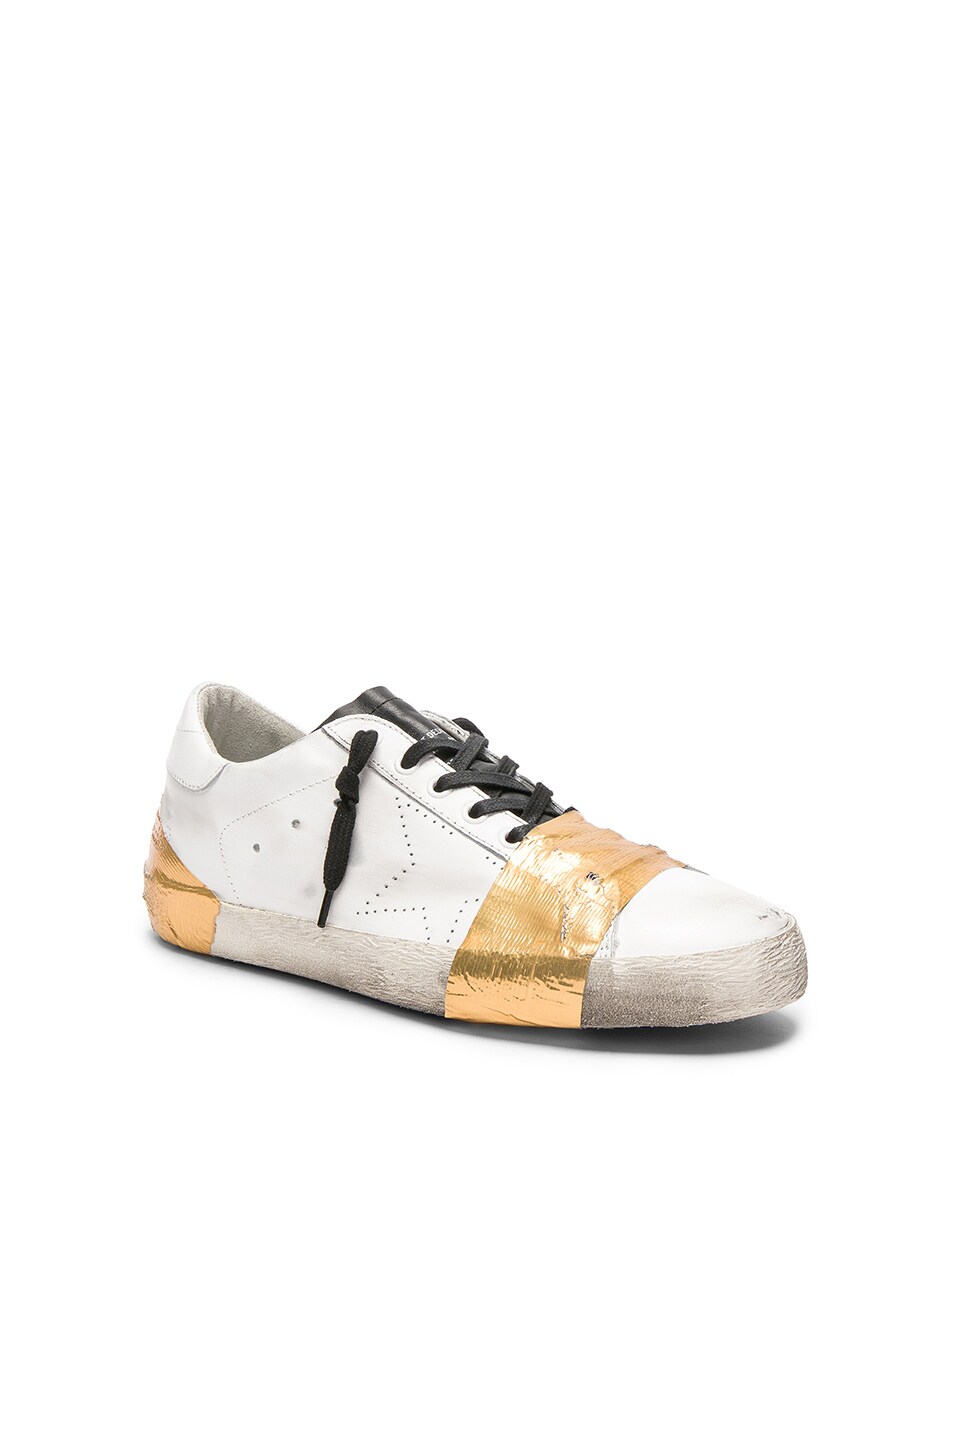 Image 1 of Golden Goose Superstar Sneakers in White Leather & Gold Scotch